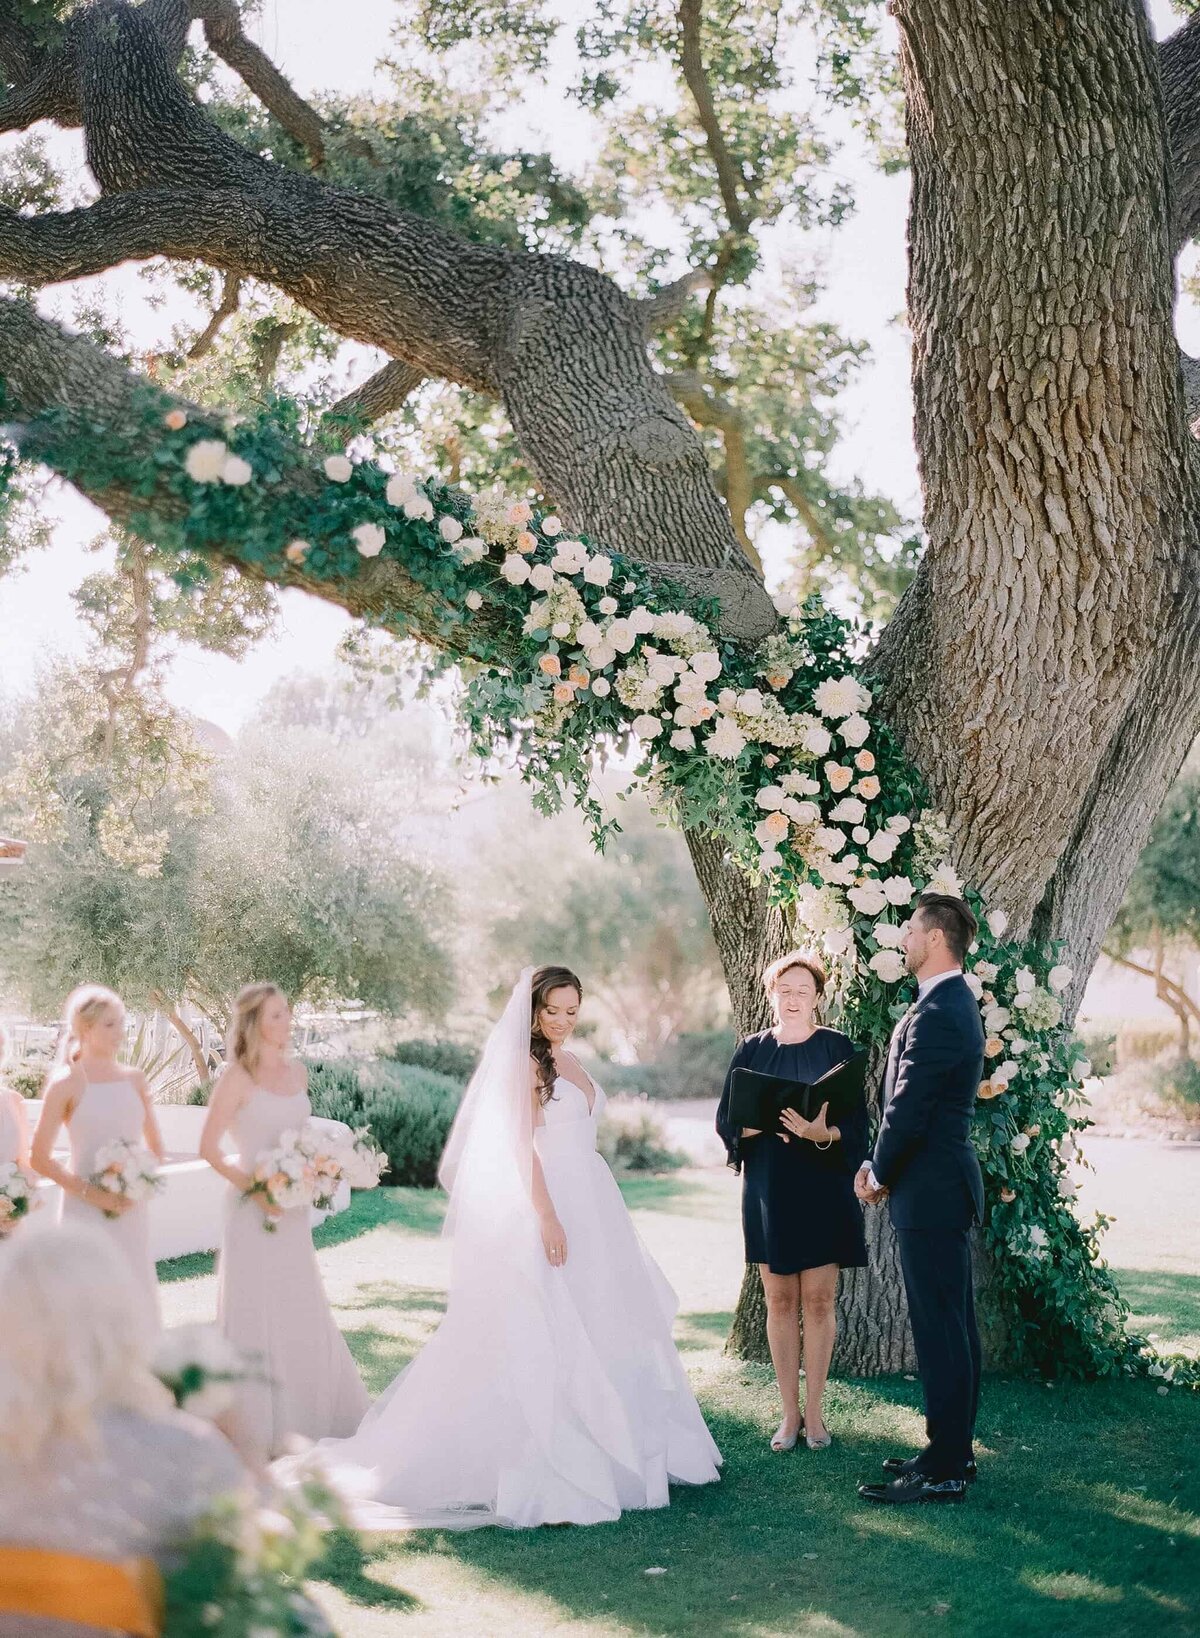 Bride and groom at the custom tree floral altar